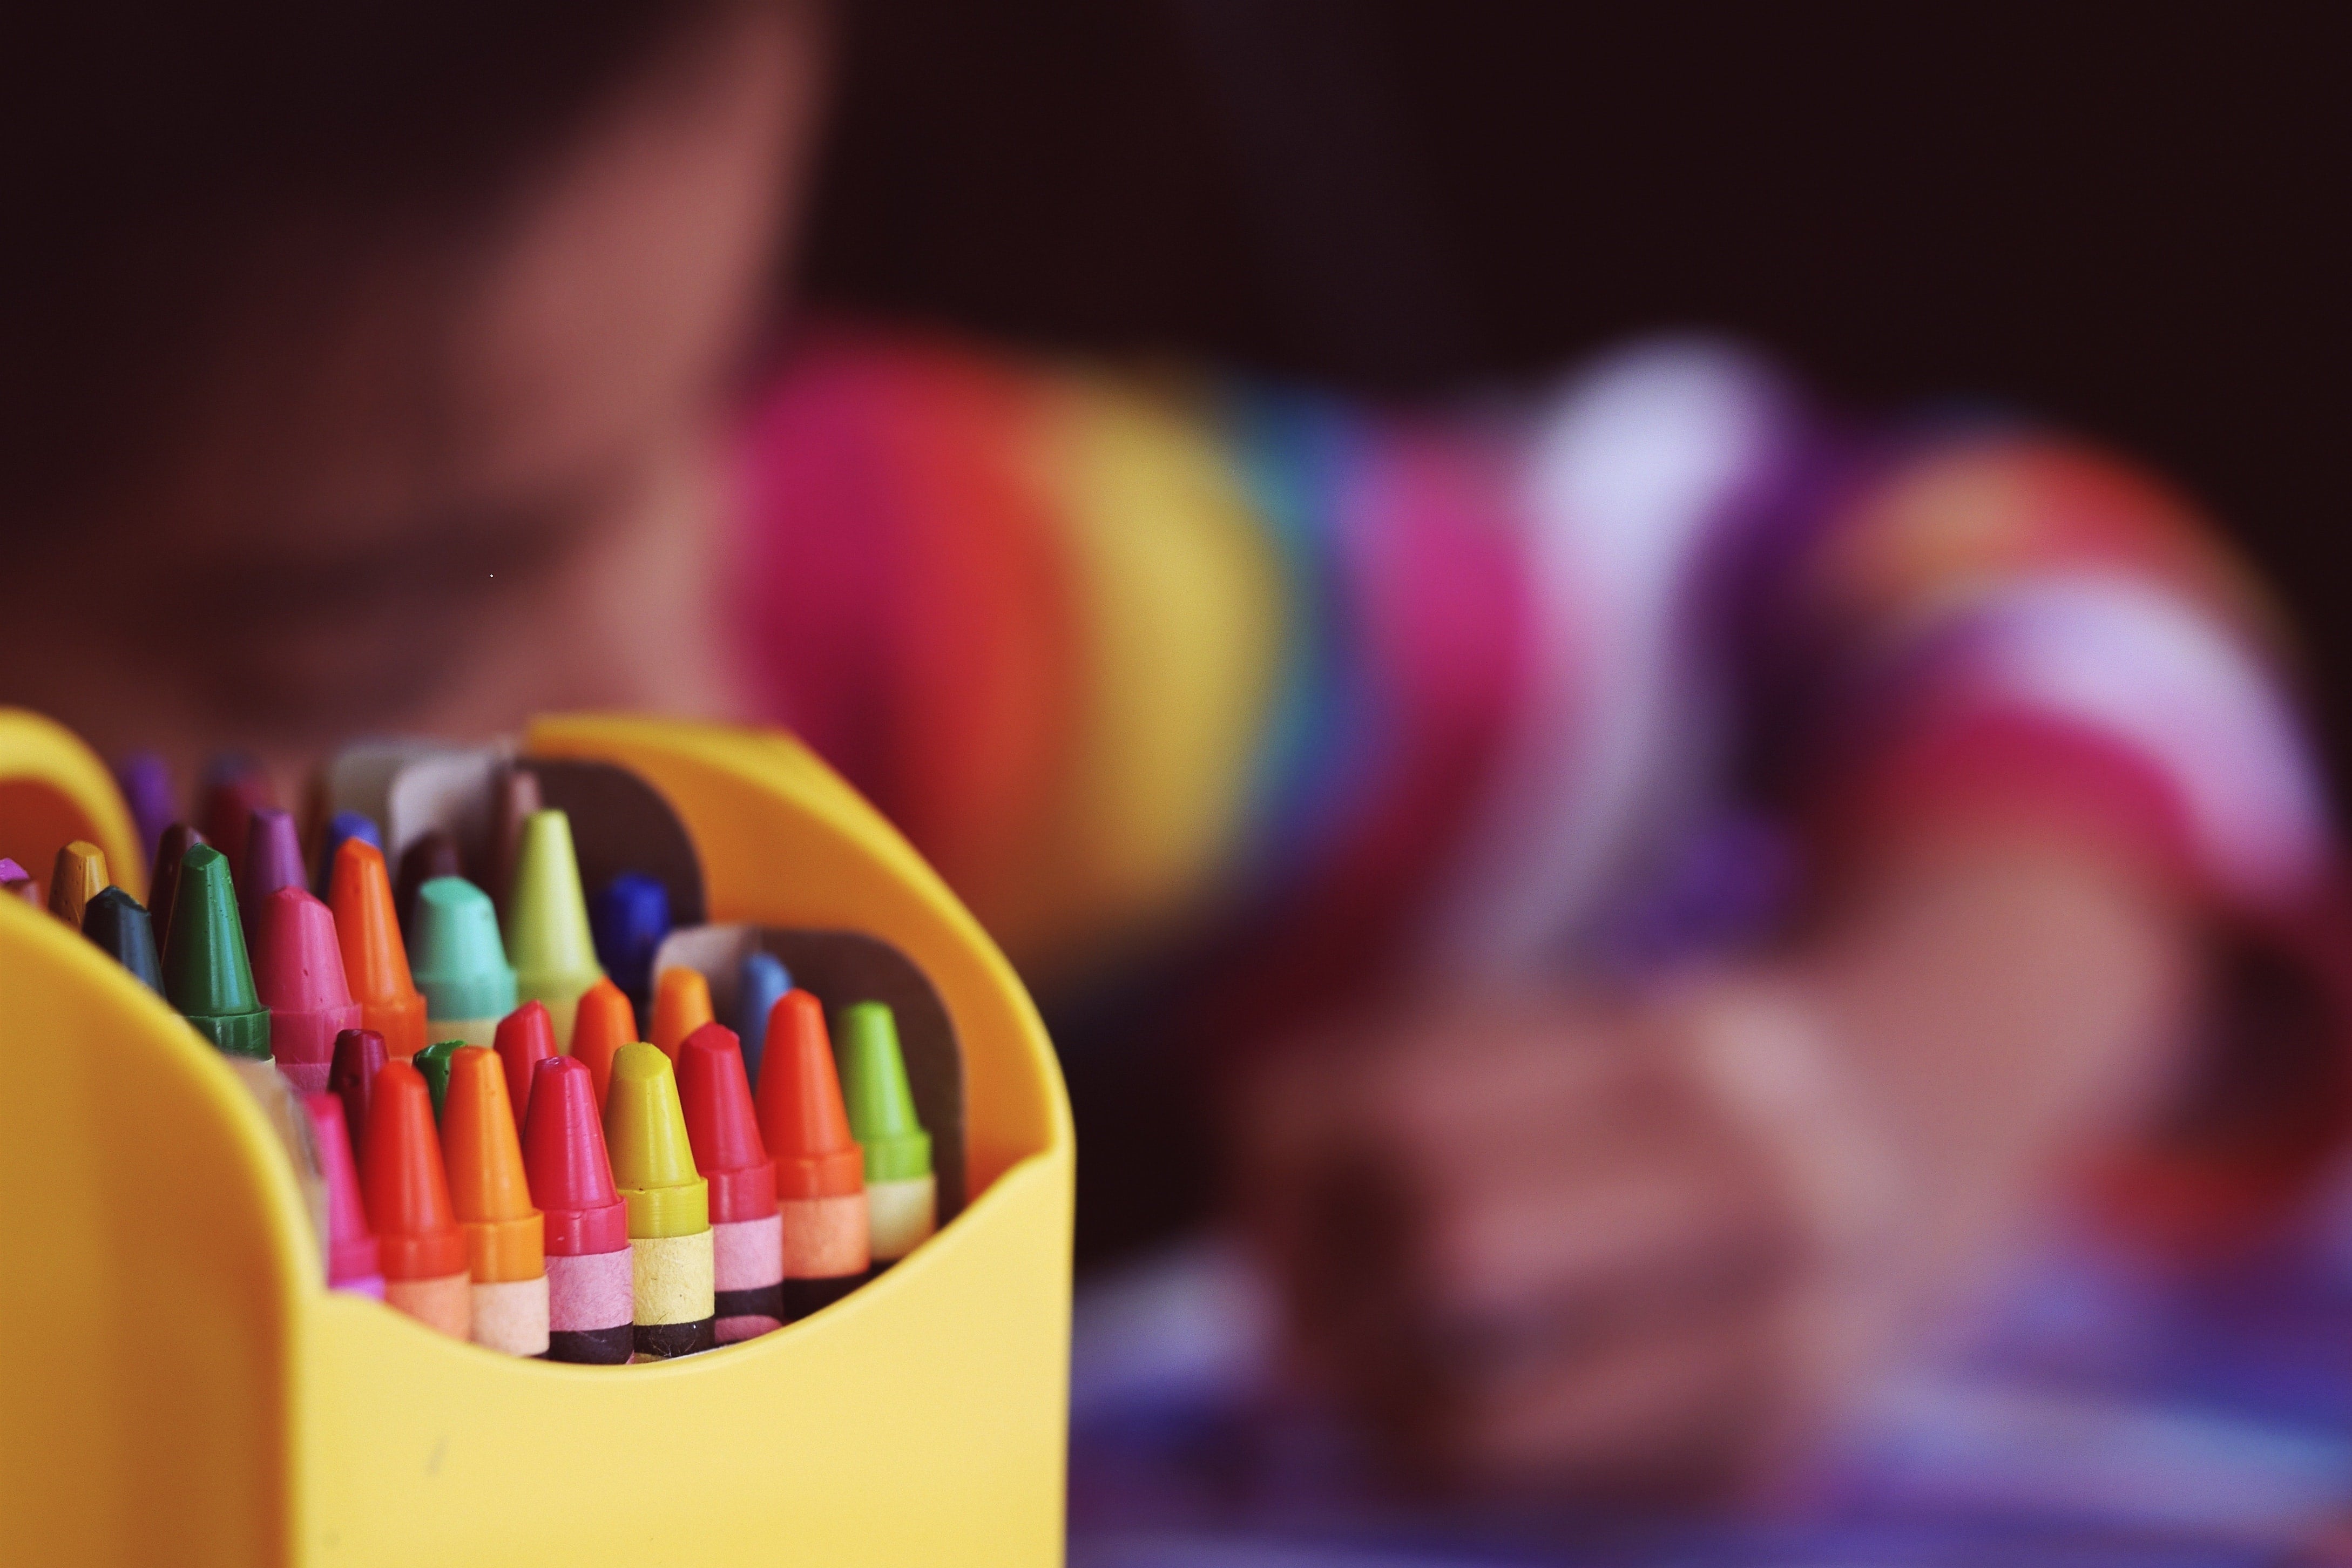 A box of crayons in focus, with a blurred child drawing in the background